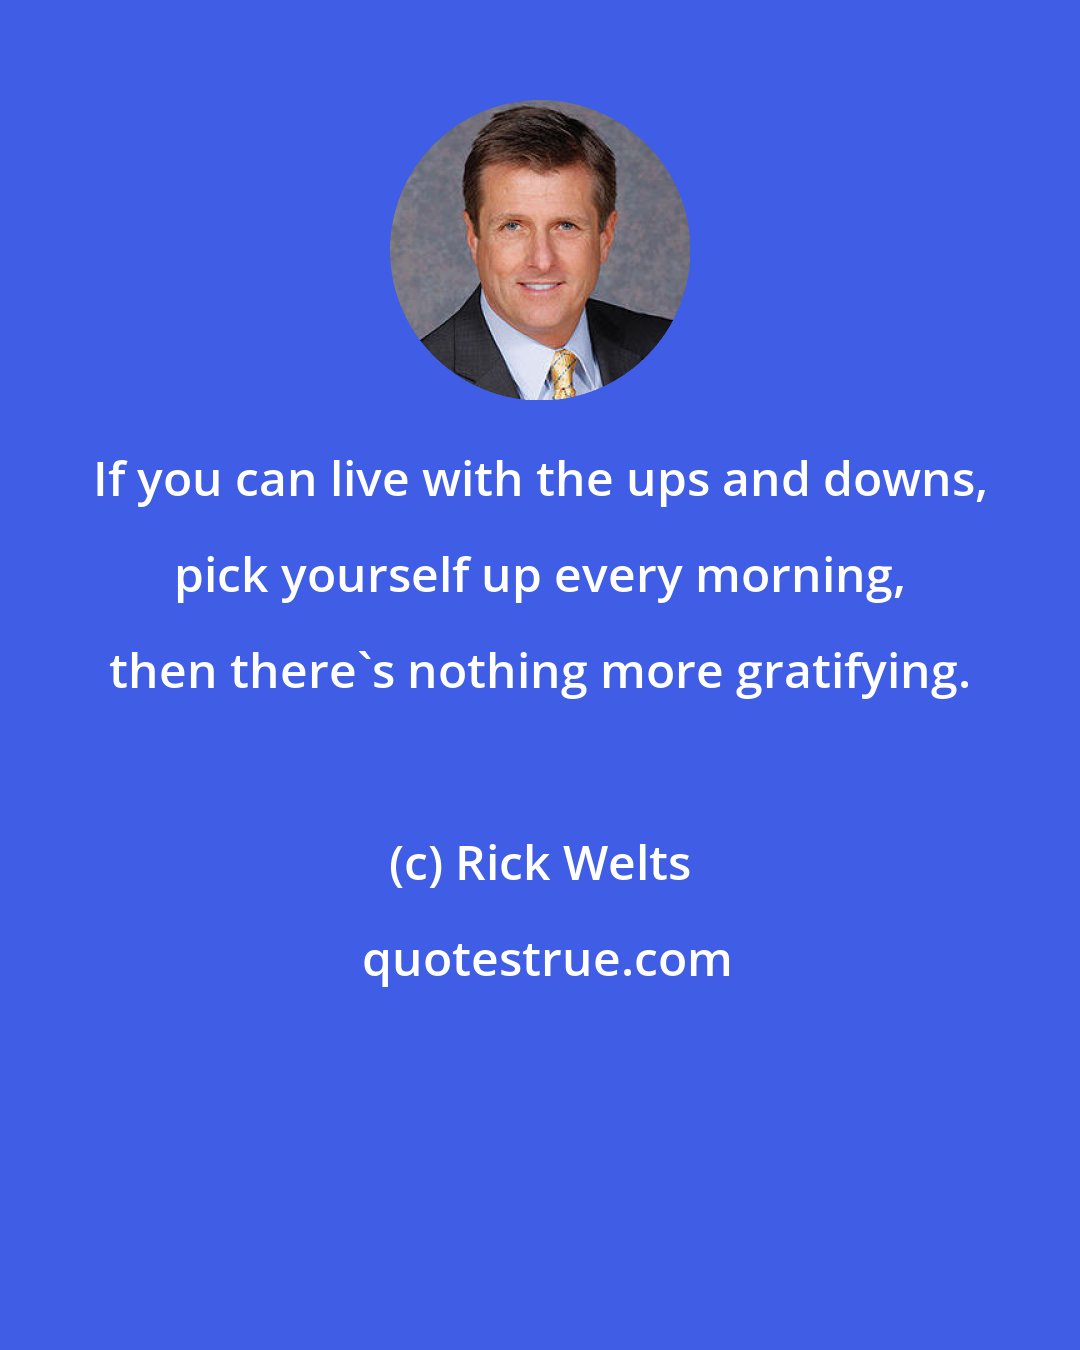 Rick Welts: If you can live with the ups and downs, pick yourself up every morning, then there's nothing more gratifying.